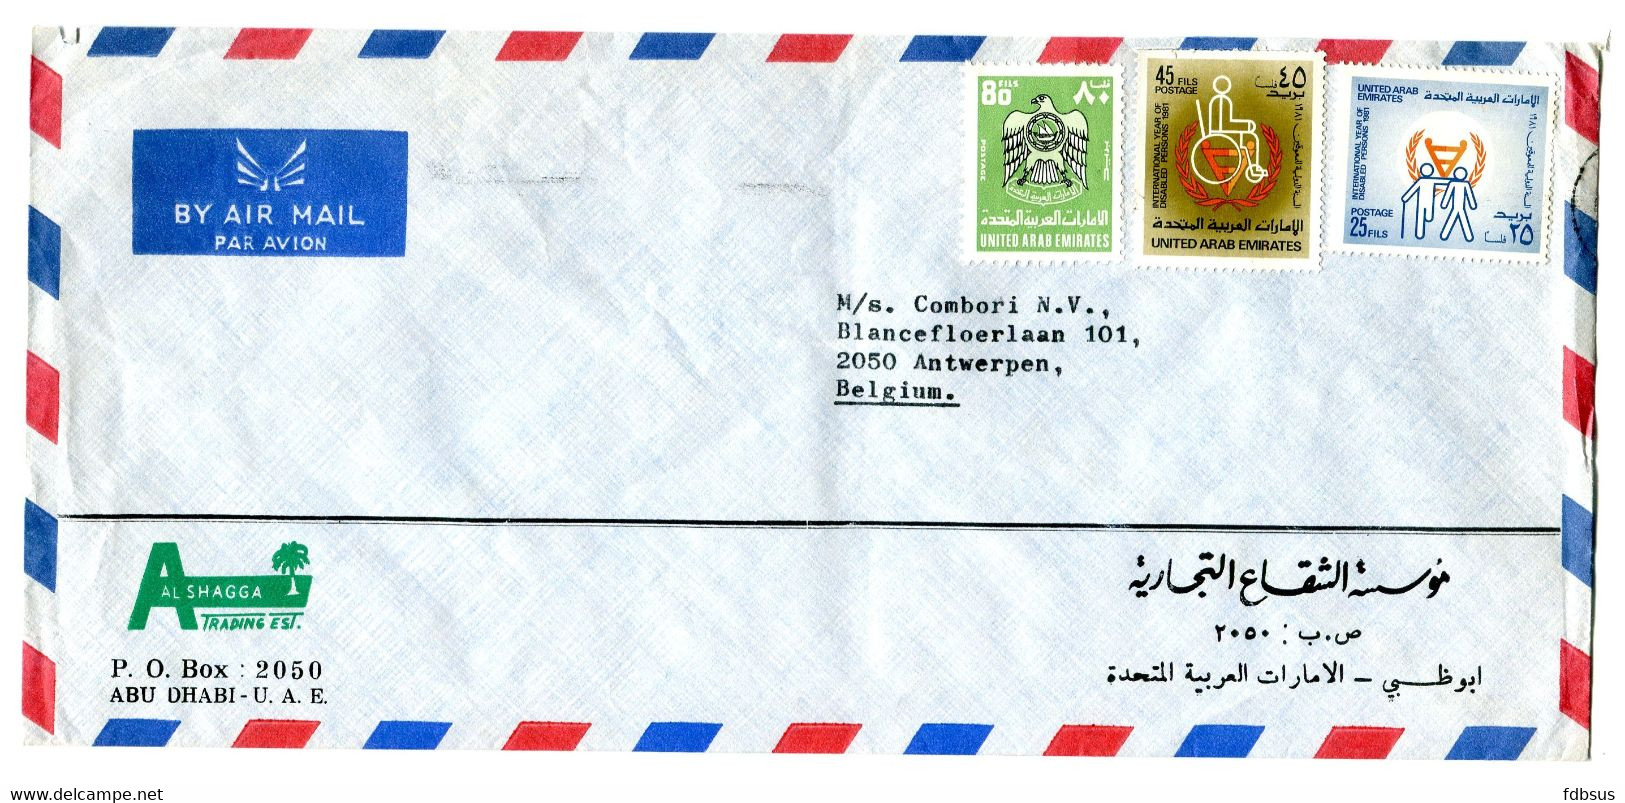 1981 Airmail Cover From AL SHAGGA TRADING To Belgium - See Scan For Stamp (s) And Cancellations - No Cancellation - Abu Dhabi